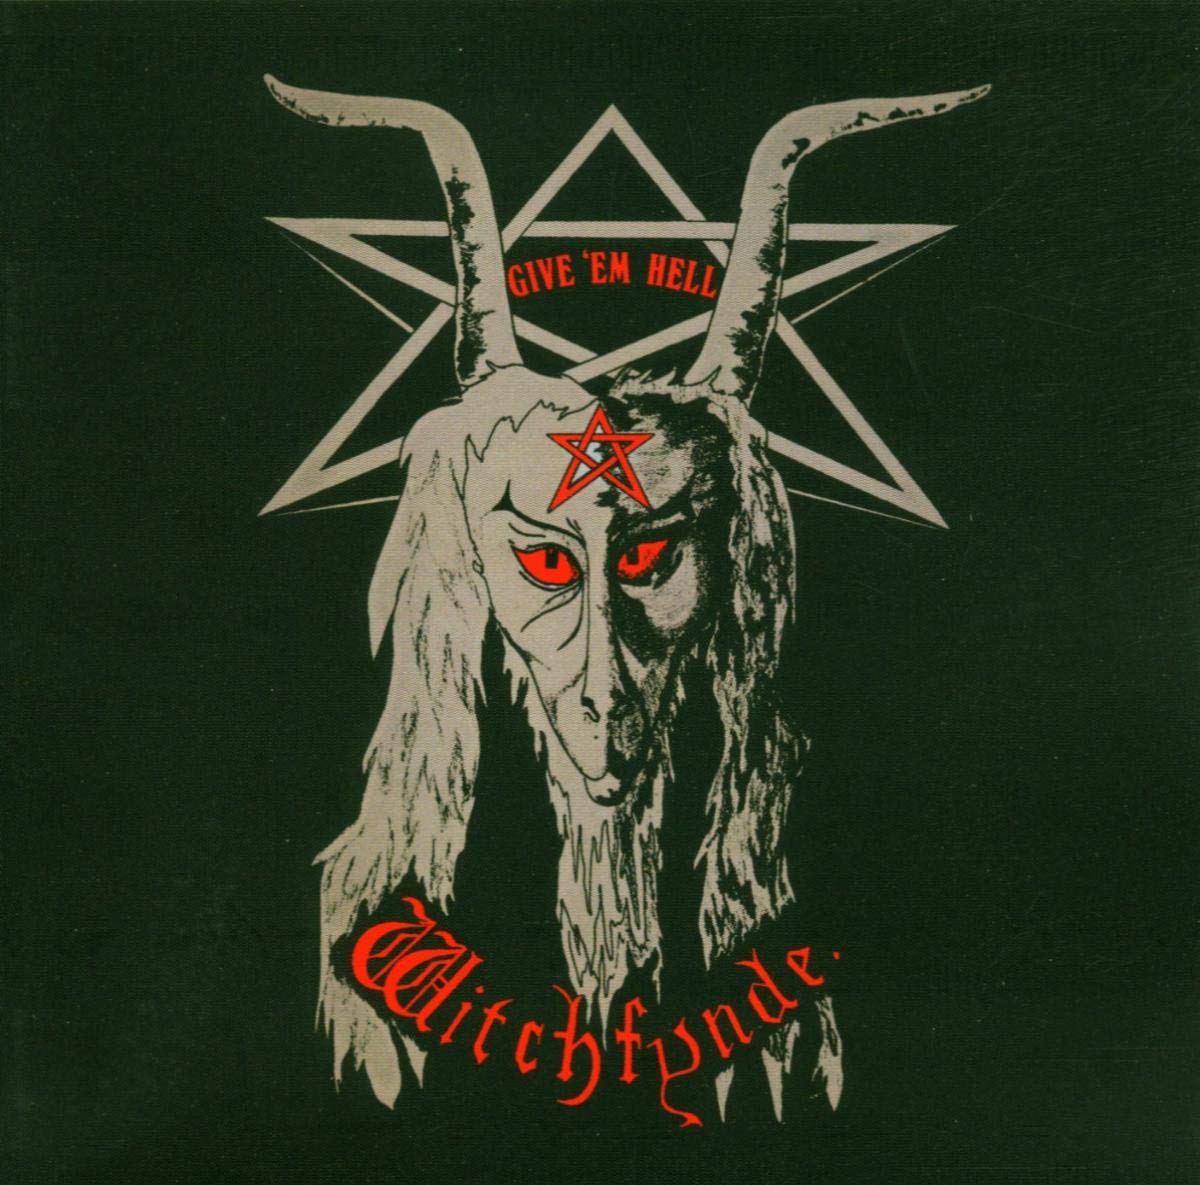 Witchfynde-Give Em Hell-(HRR 799 CD)-REMASTERED-CD-FLAC-2021-WRE